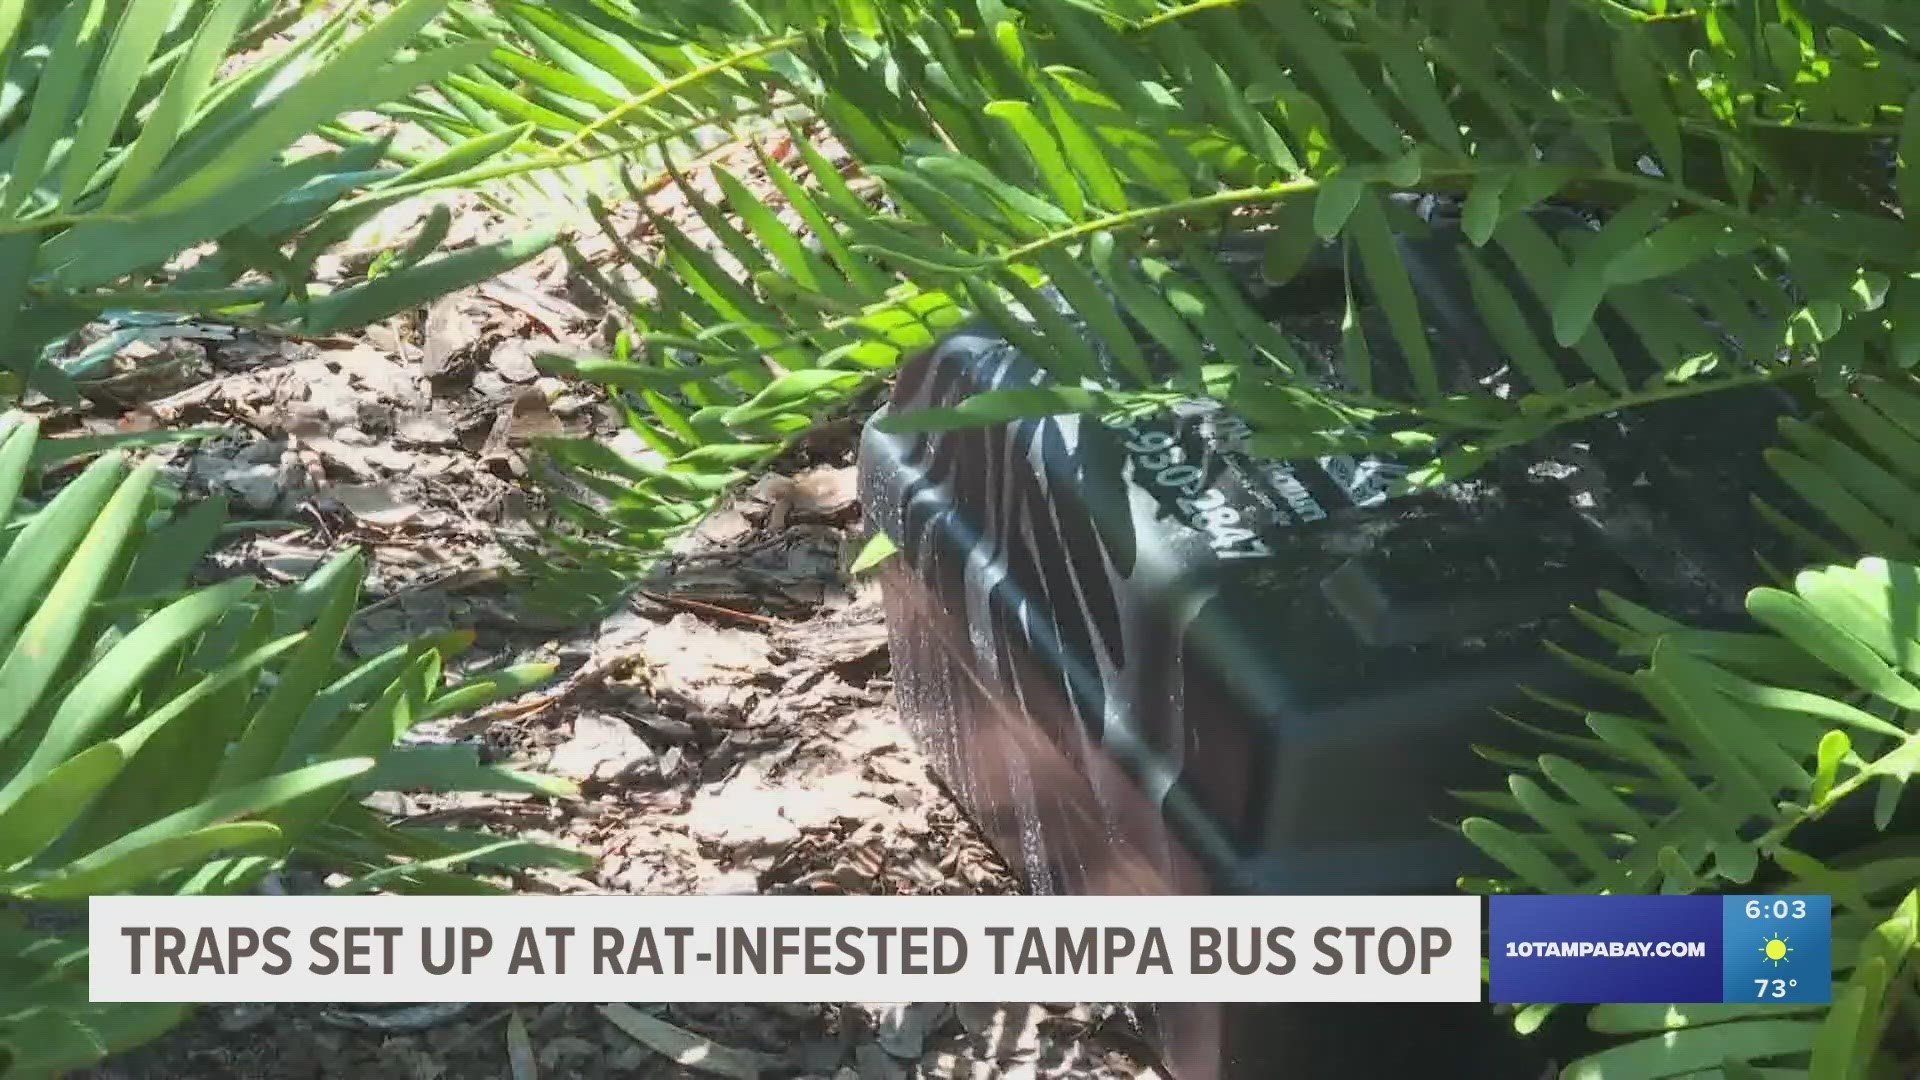 For months near the corner of Florida and Hillsborough Avenue, a colony of rats has overtaken the bus stop. Now, the city has hired a service to set traps near it.